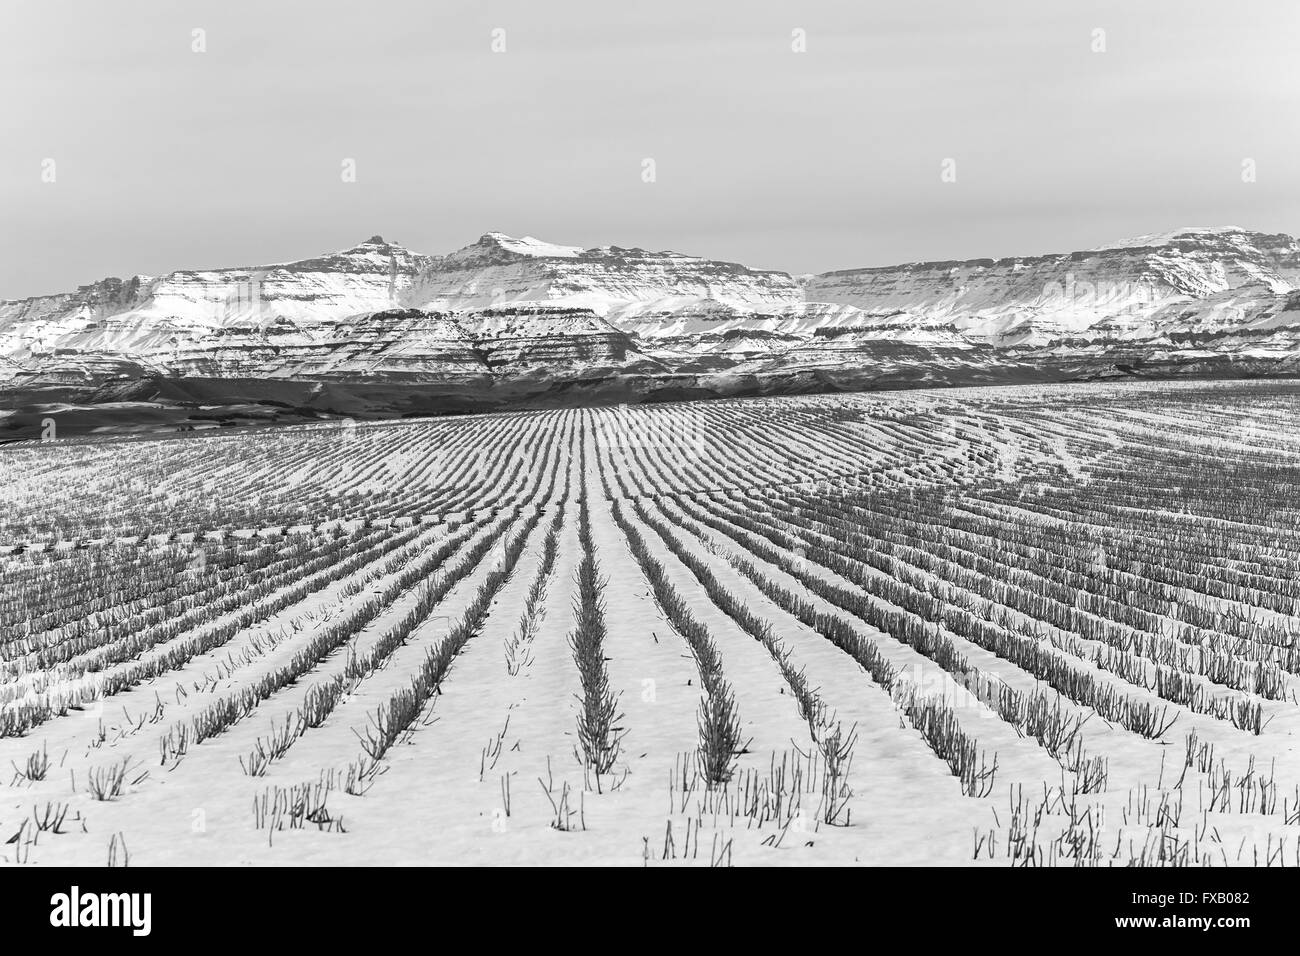 Farmlands harvested field crop stubs contrast against winter snow covered mountain landscape. Stock Photo